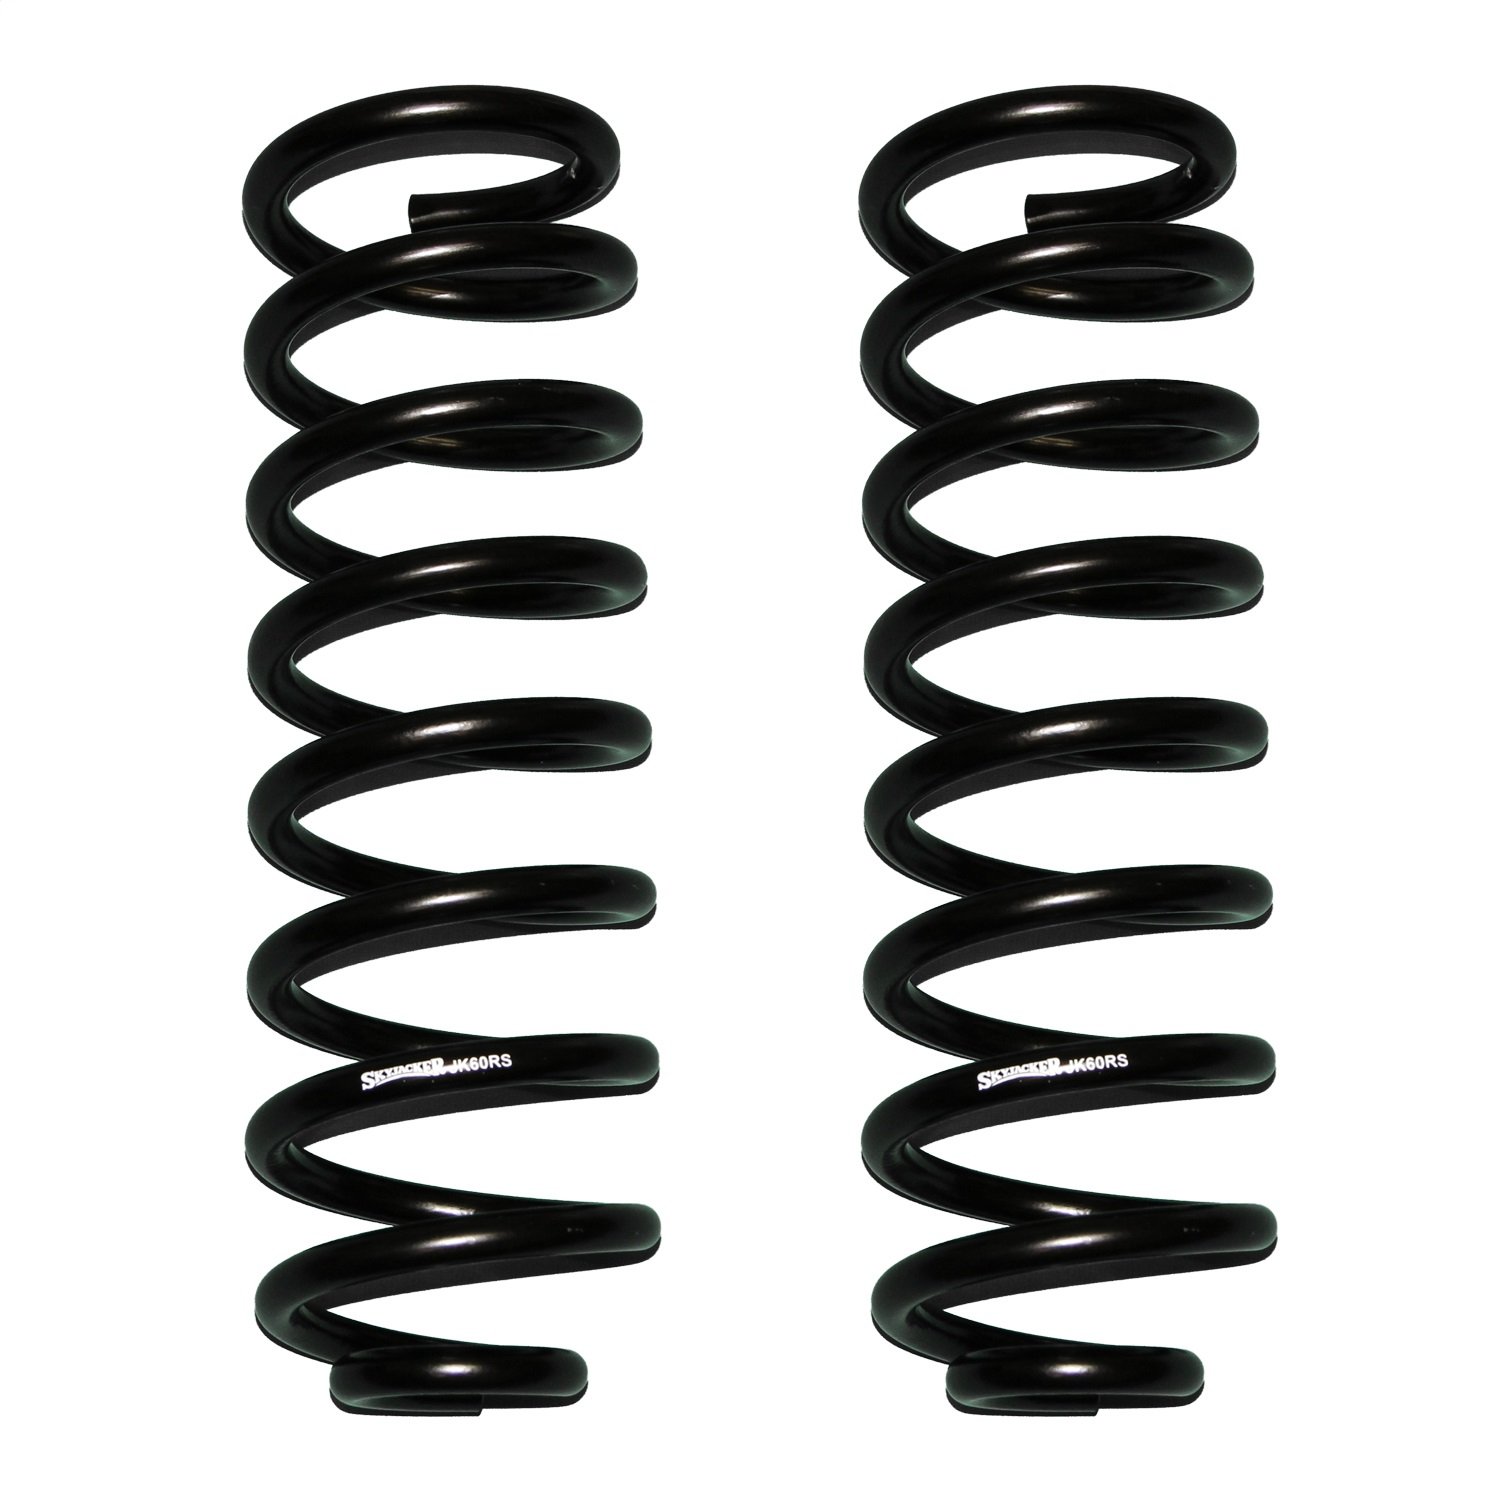 JK60R Softride Lift Coil Springs, Lift: 6-7 in.